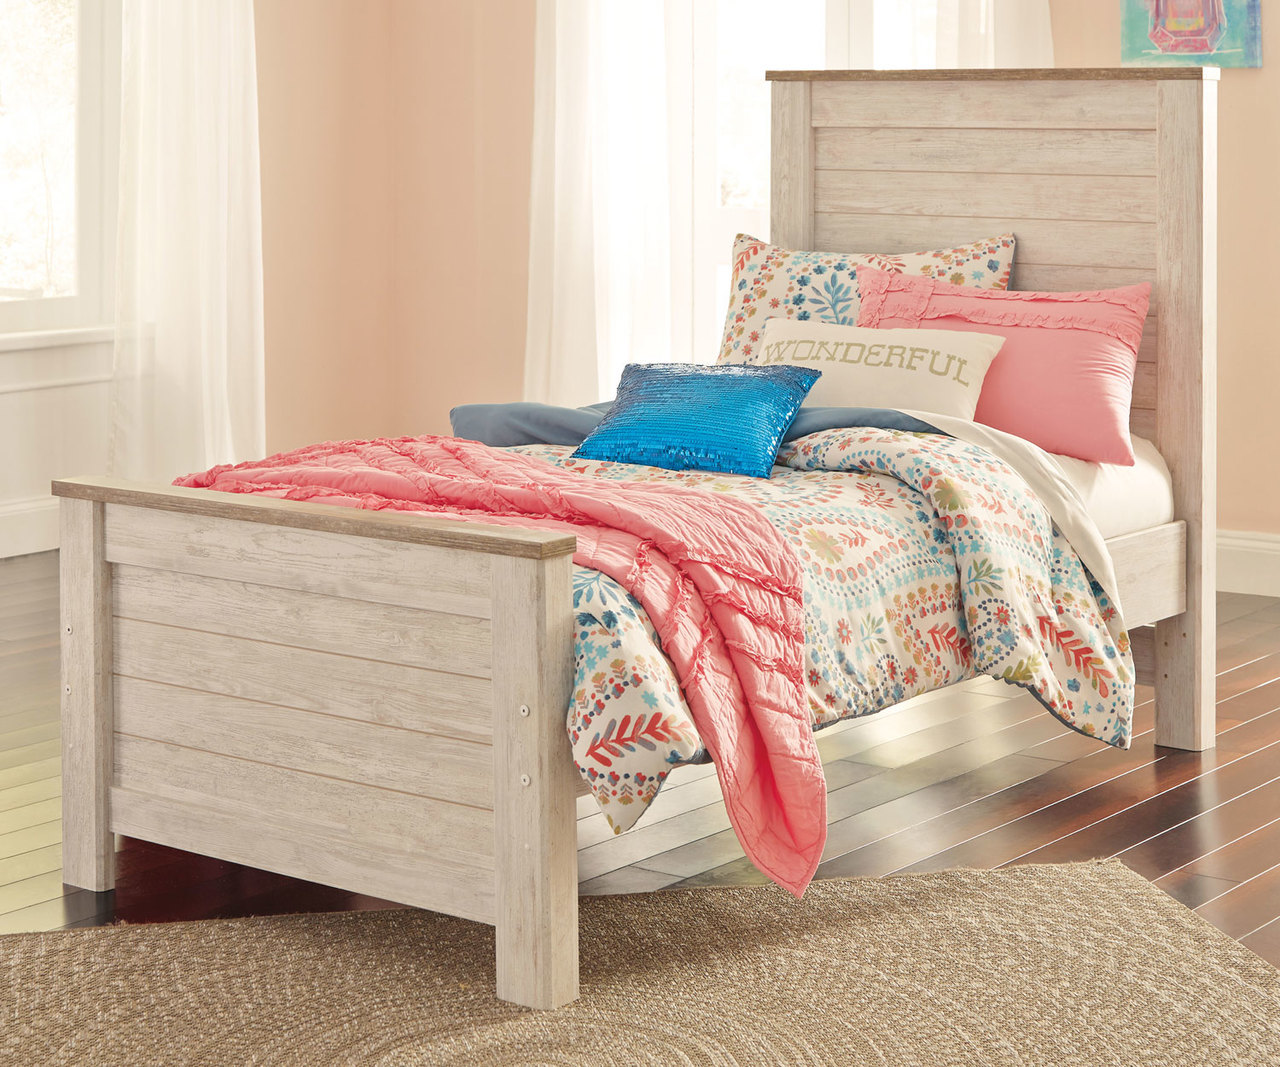 Girls Twin Bedroom Set All Products Are Discounted Cheaper Than Retail Price Free Delivery Returns Off 79